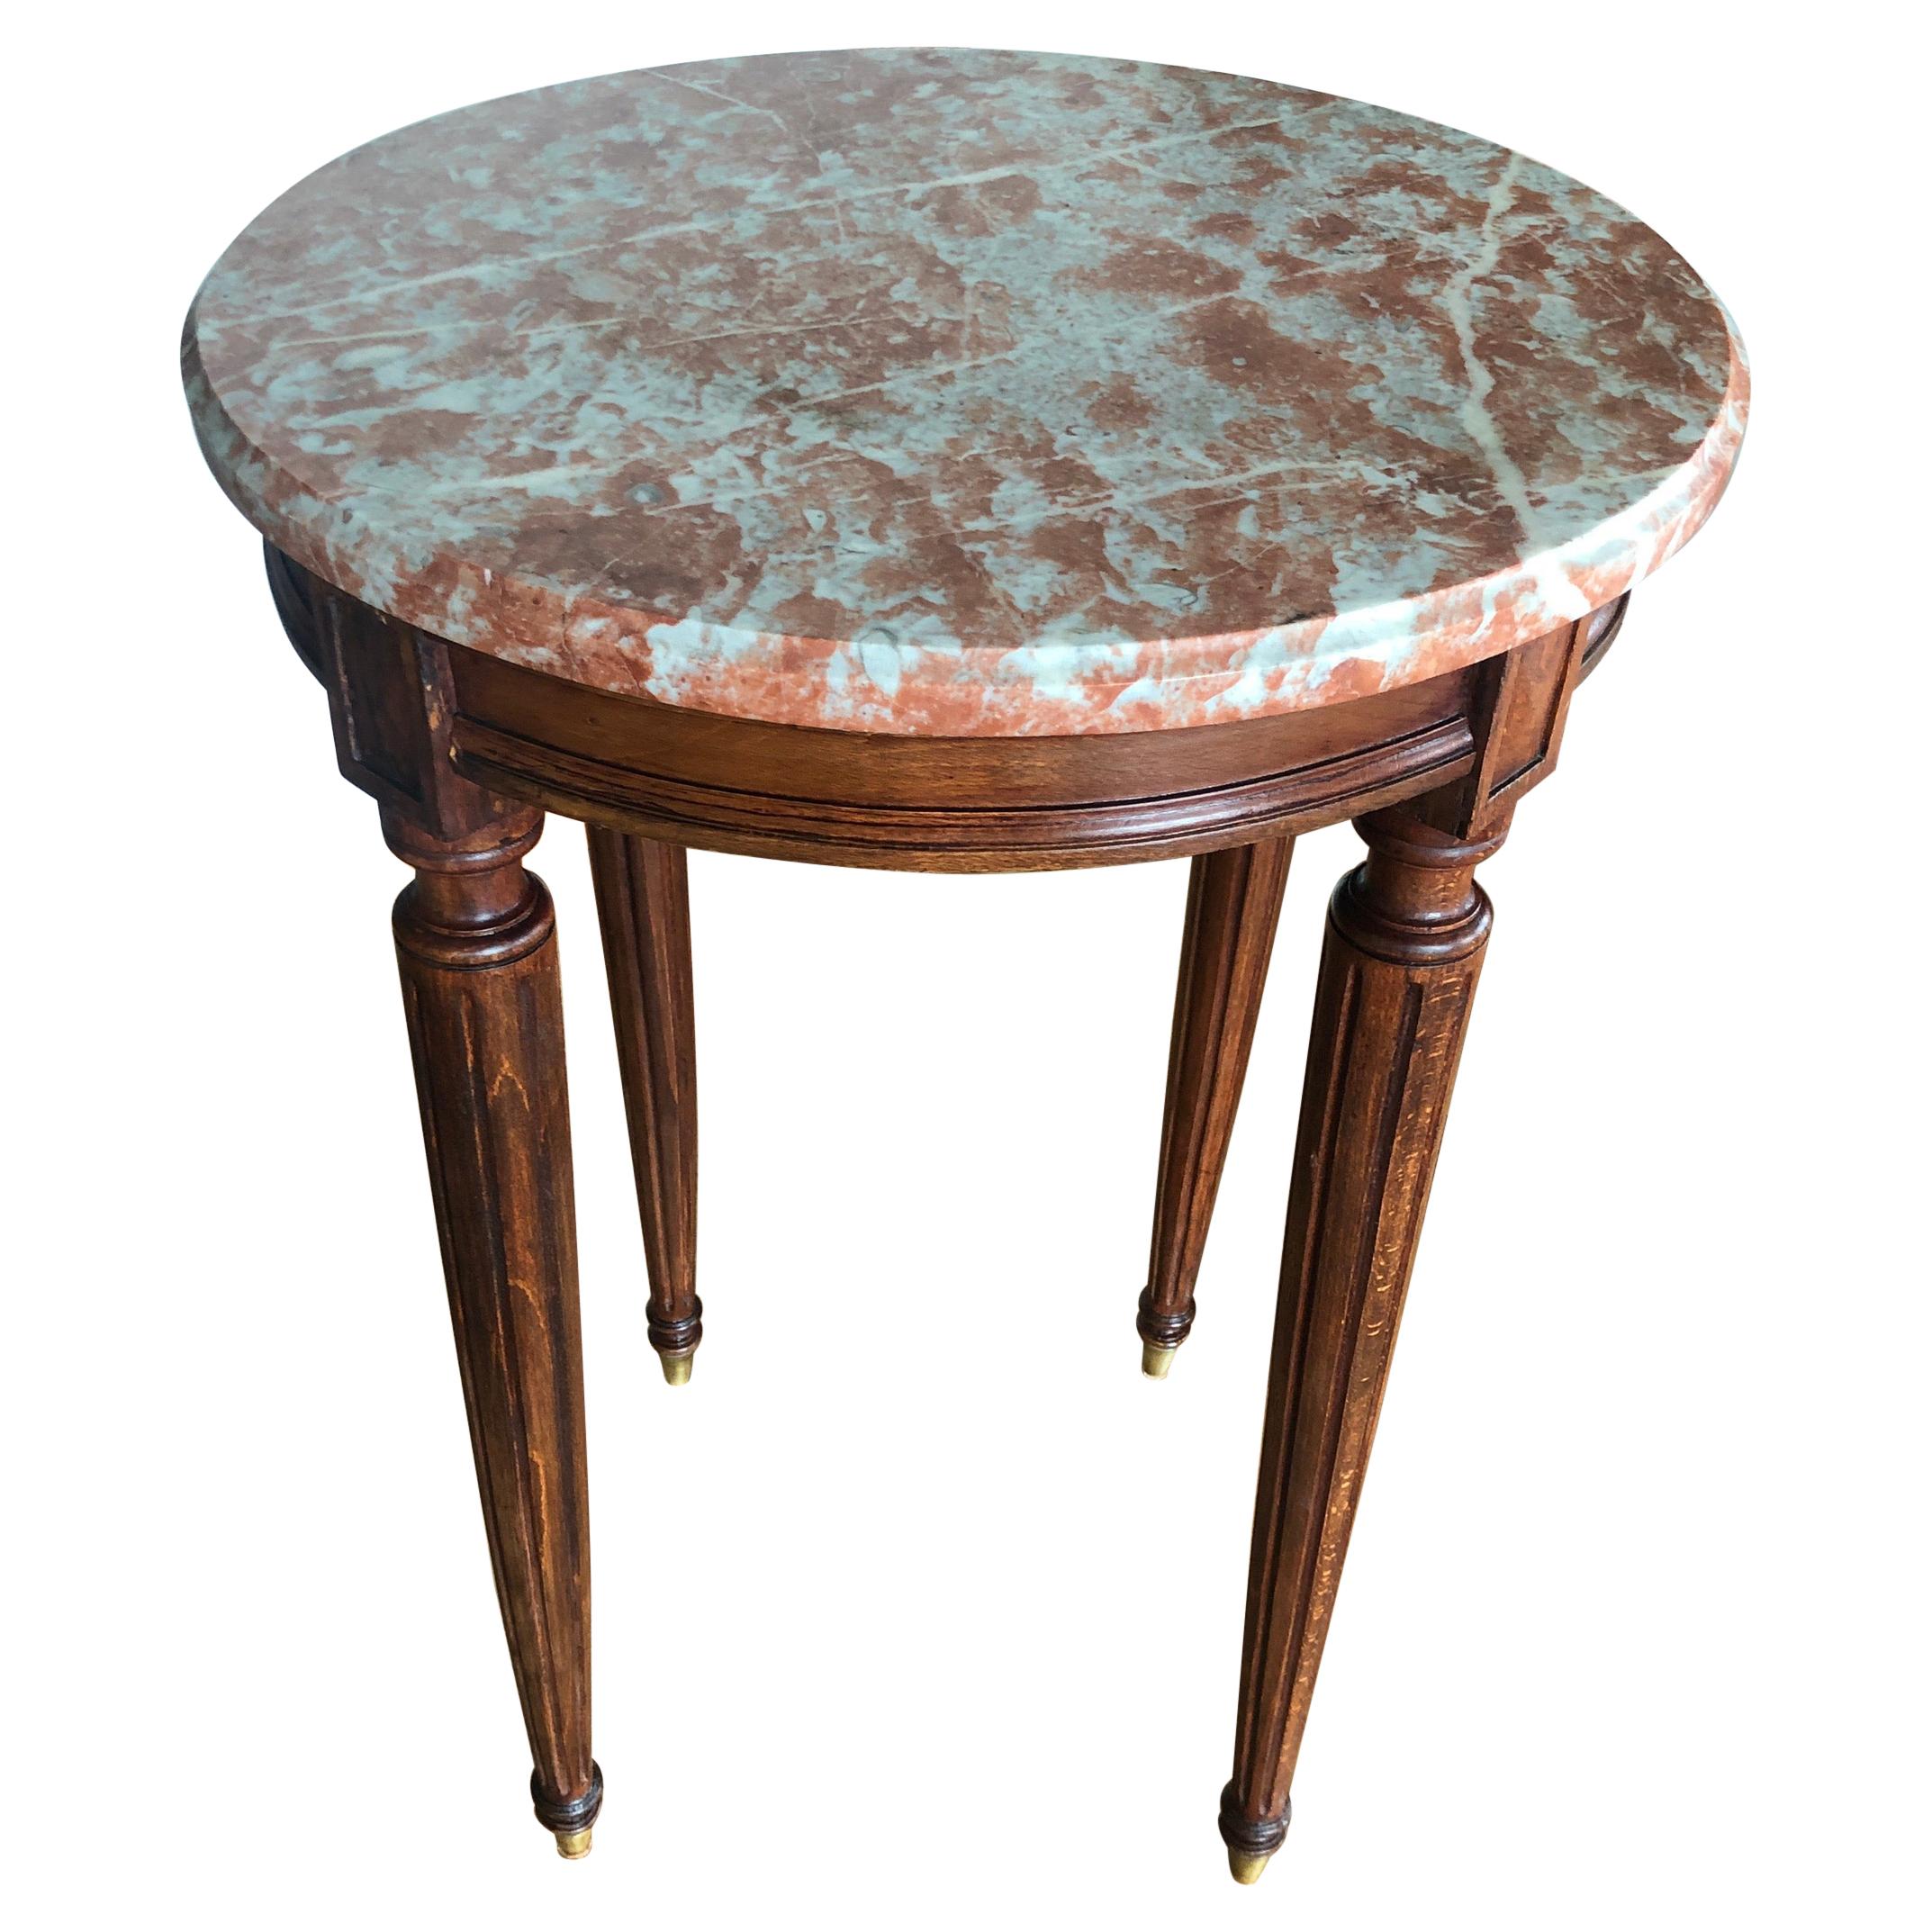 19th Century French Small Round Marble Top Side Table in Louis XVI Style